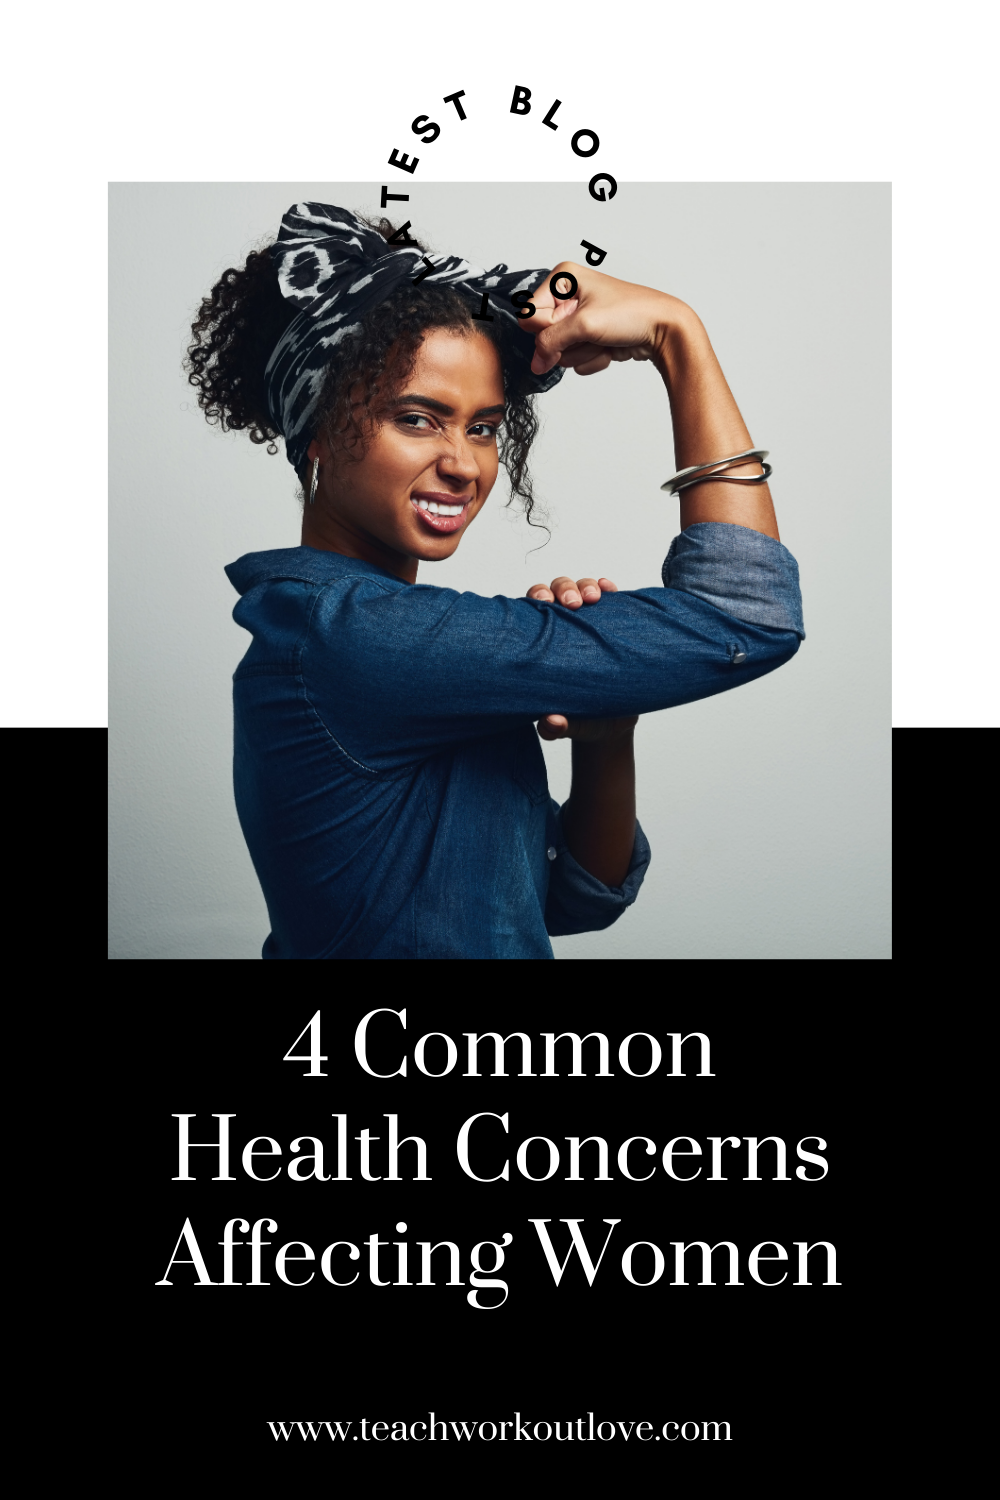 There are many health concerns, both serious and not so serious, that commonly affect women. Here are the top ones to be concerned about.